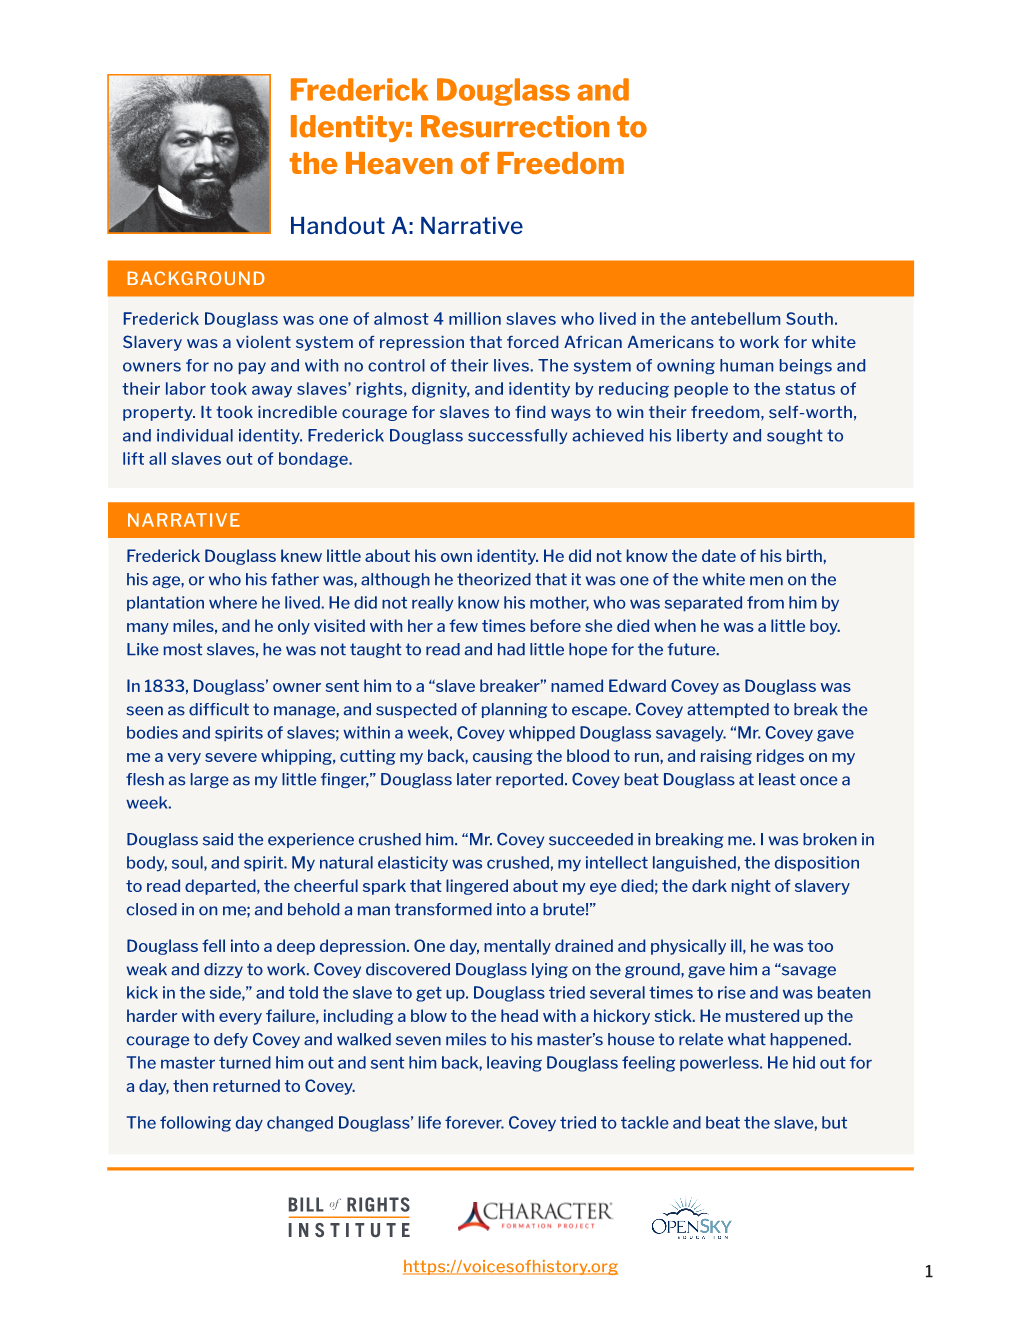 Frederick Douglass and Identity: Resurrection to the Heaven of Freedom